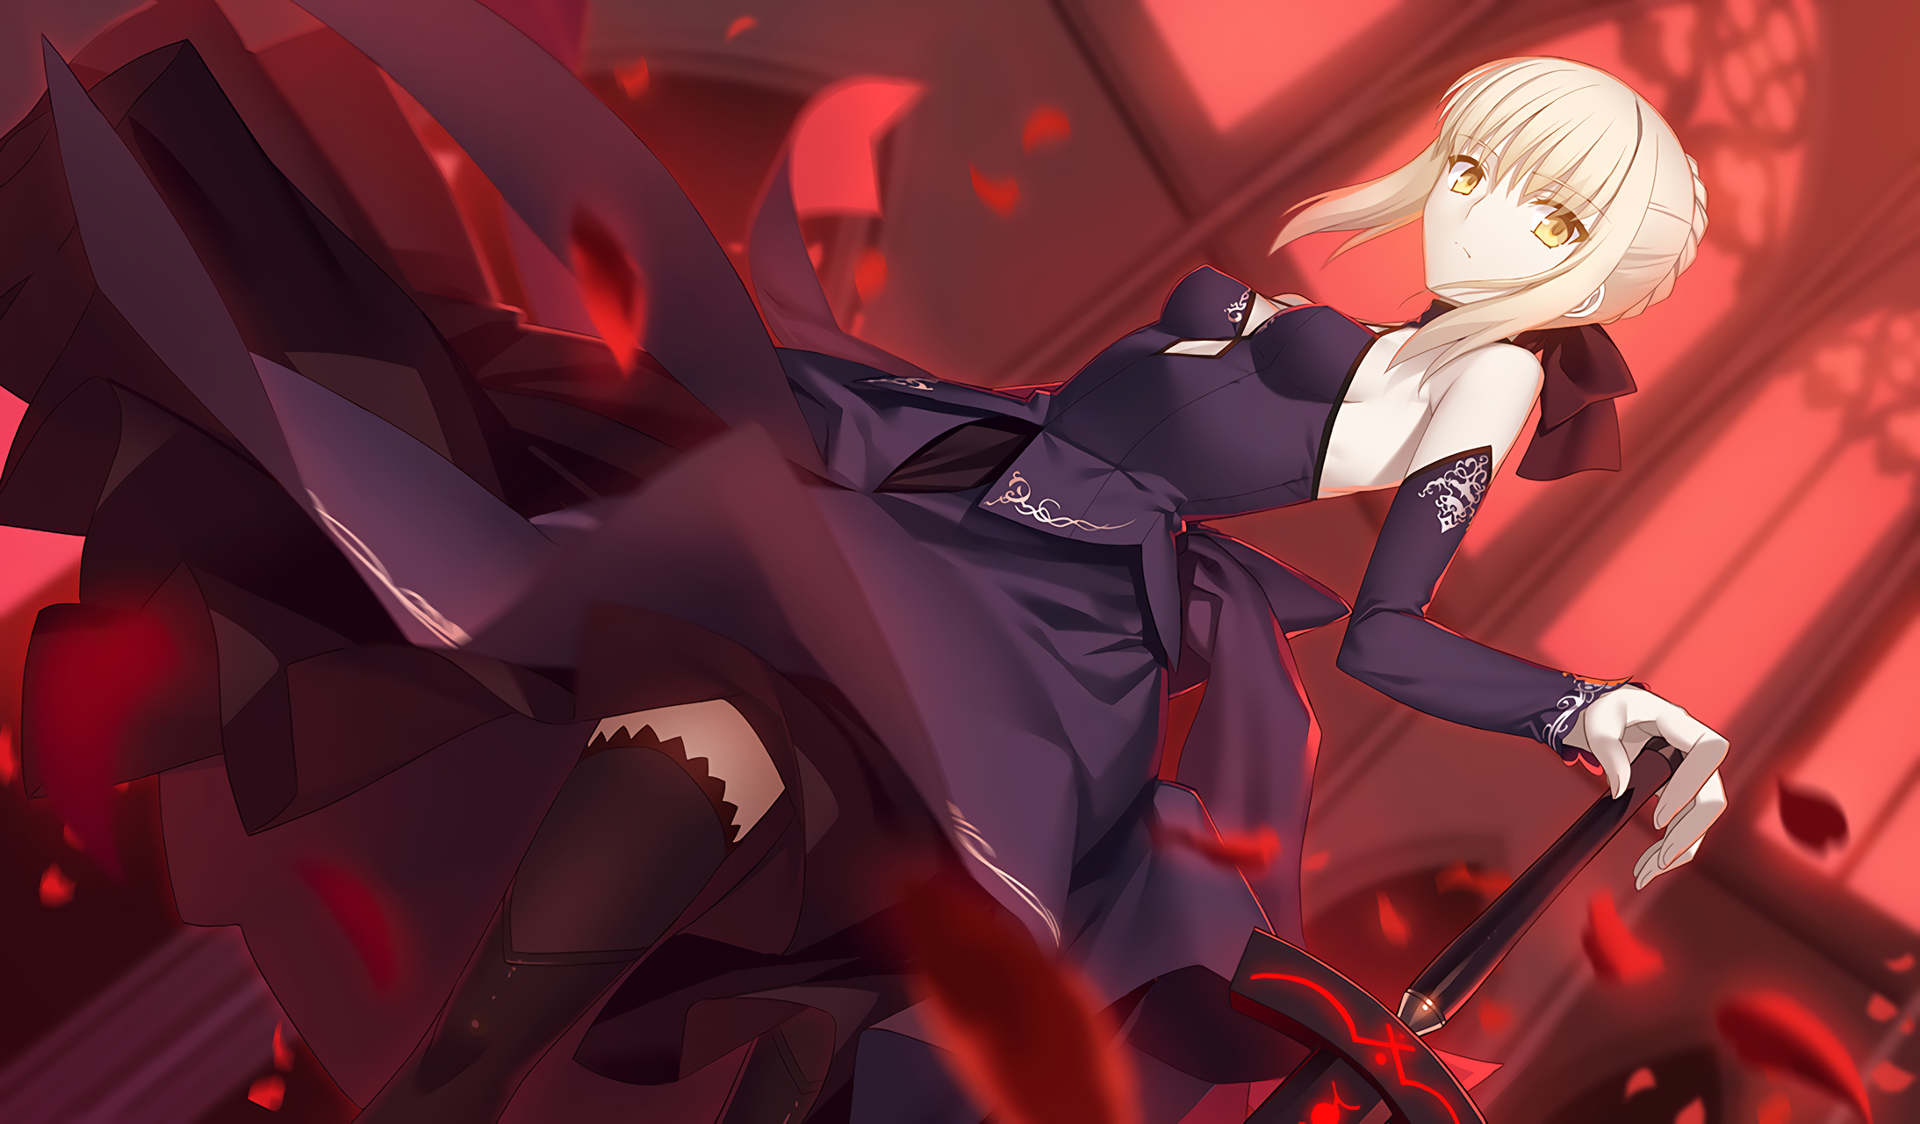 Saber Fate Stay Night Wallpapers - Top Free Saber Fate Stay Night ...